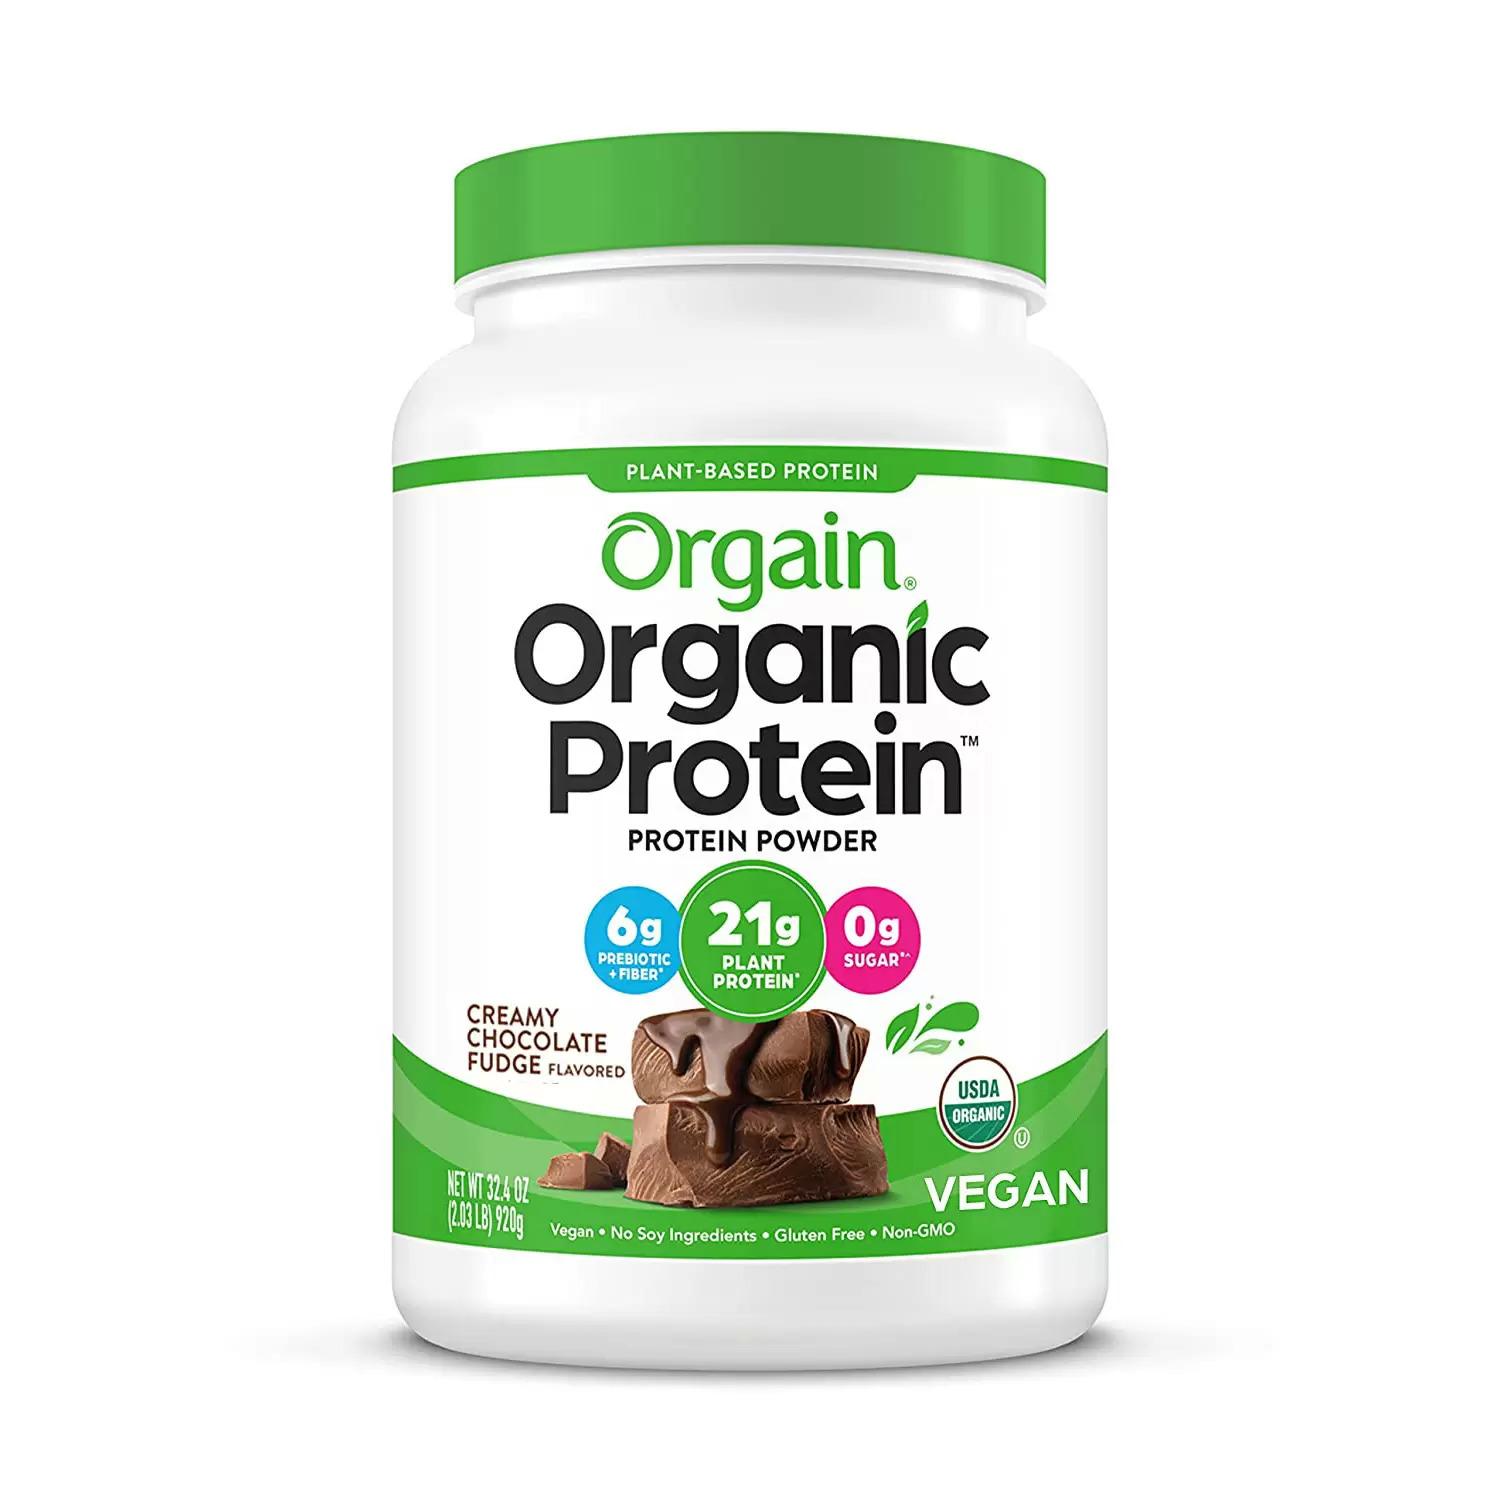 Orgain Organic Plant Based Protein Powder for $14.25 Shipped